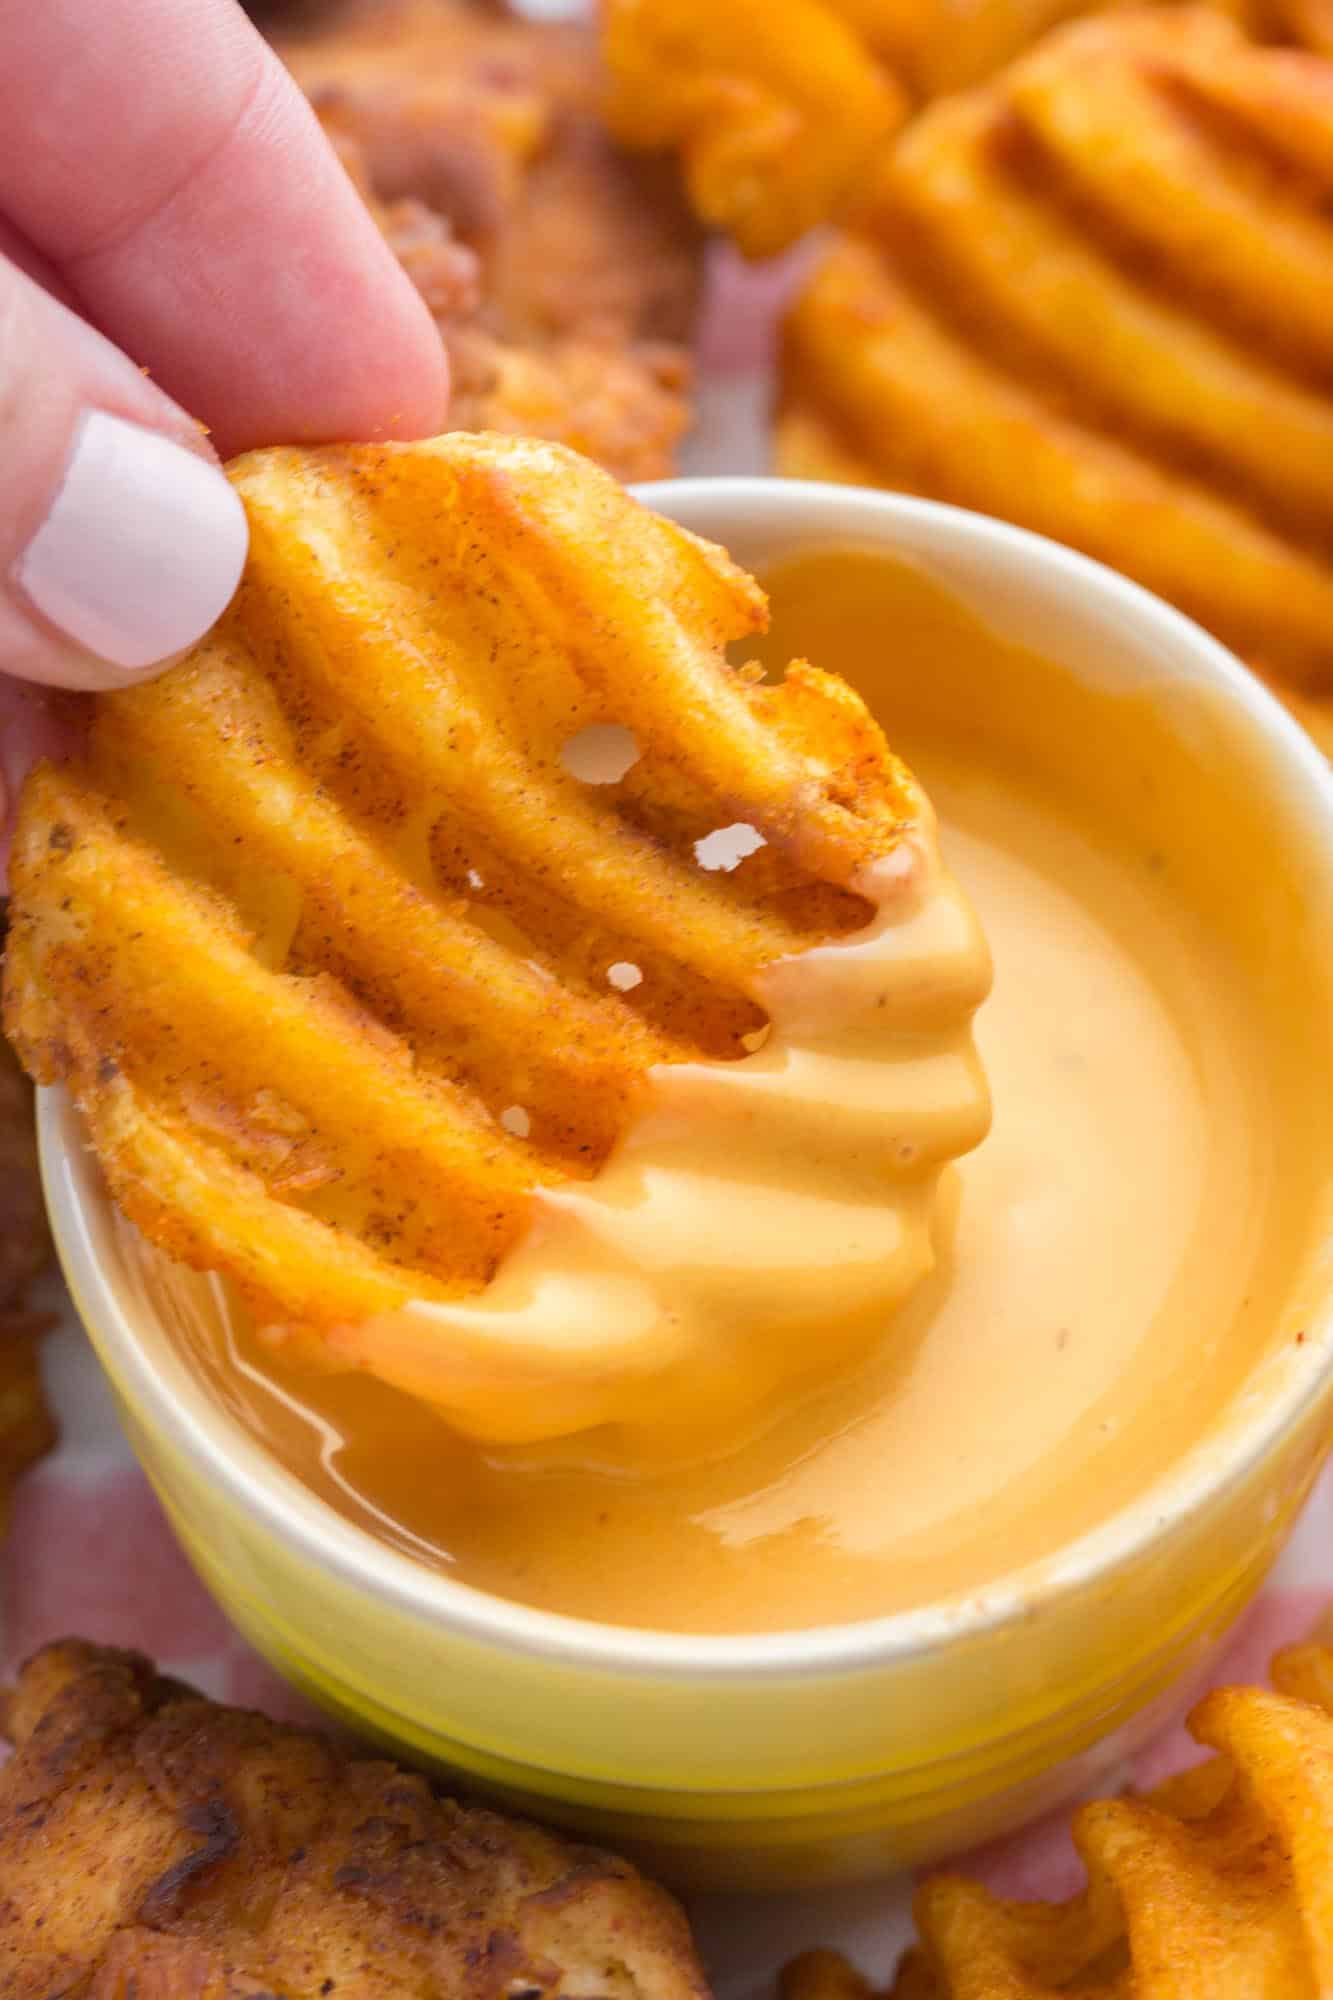 a waffle fry being dipped into a small cup of chick fil a sauce